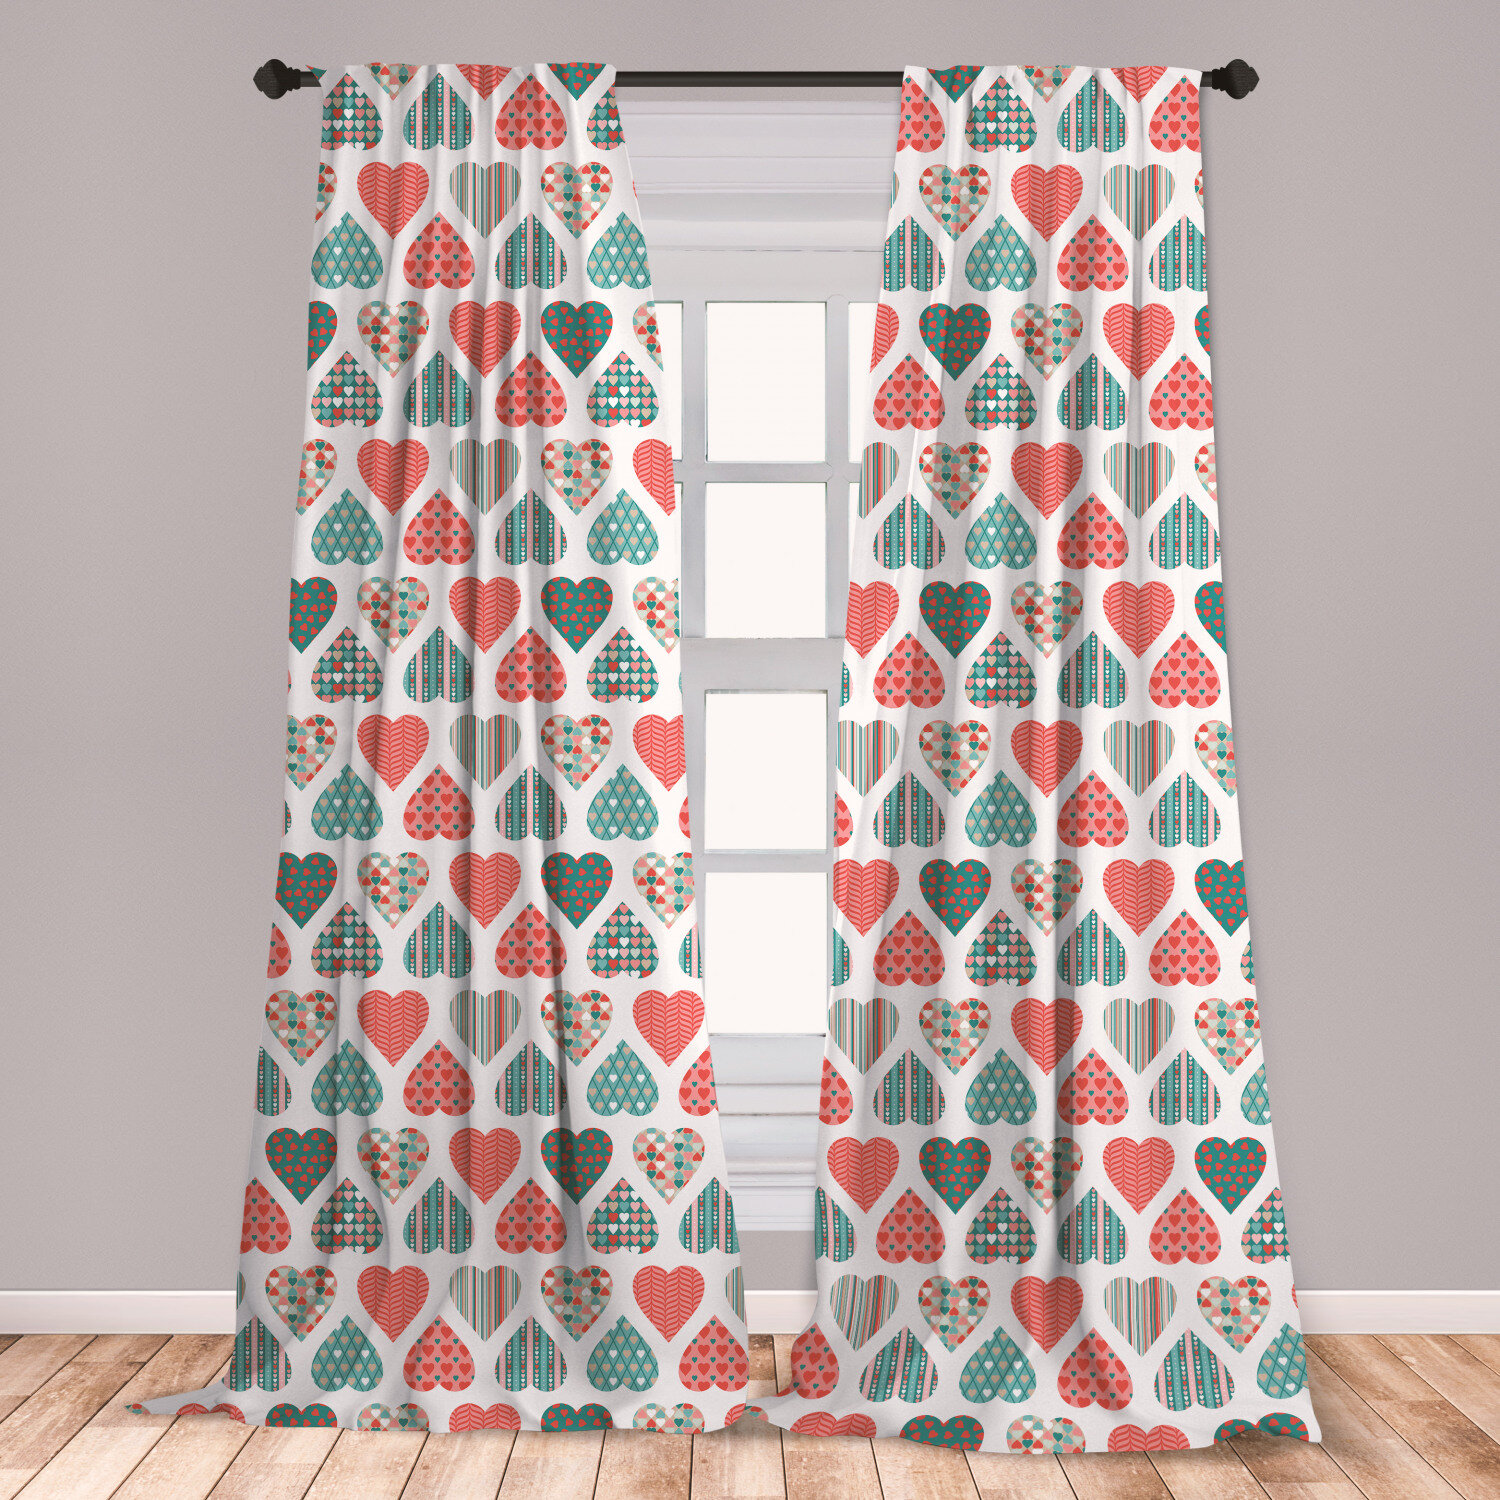 Awesome teal and coral bedroom ideas East Urban Home Ambesonne Valentines 2 Panel Curtain Set Retro Style Up And Down Hearts With Stripes Waves Checkered Patterns Lightweight Window Treatment Living Room Bedroom Decor 56 X 95 Teal